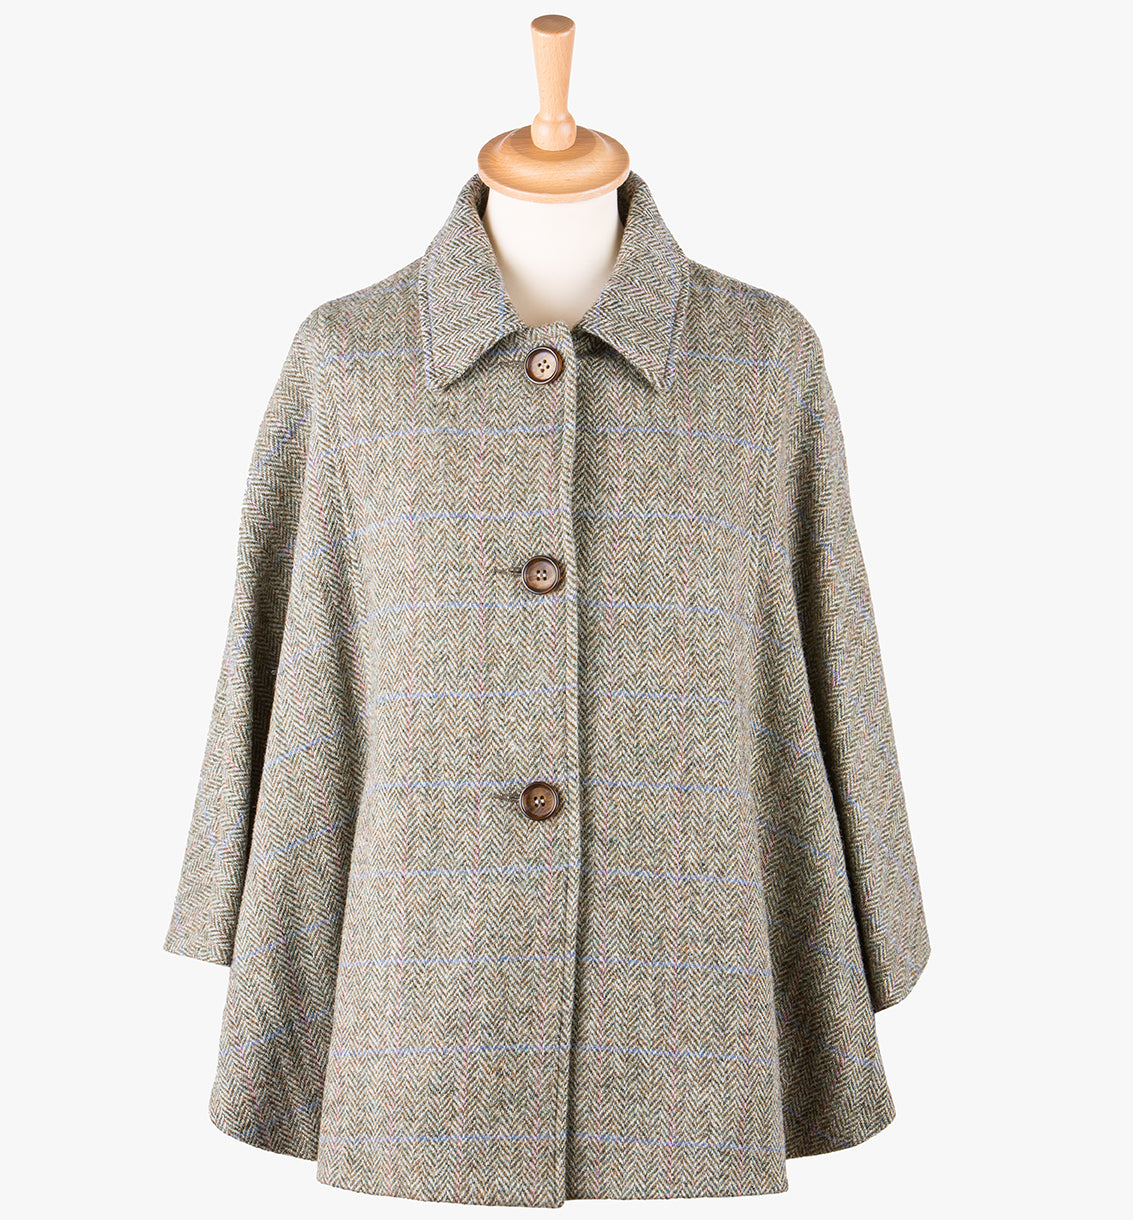 This is the Harris Tweed cape in Pastel check,  the colour is a beige and cream small herringbone with a blue and pink overcheck. It has 3 buttons and a collar which can be worn both up and down. It has buttons at the side which hold the cape together to give it more structure. This cape has two pockets and is a one size fits all garment.